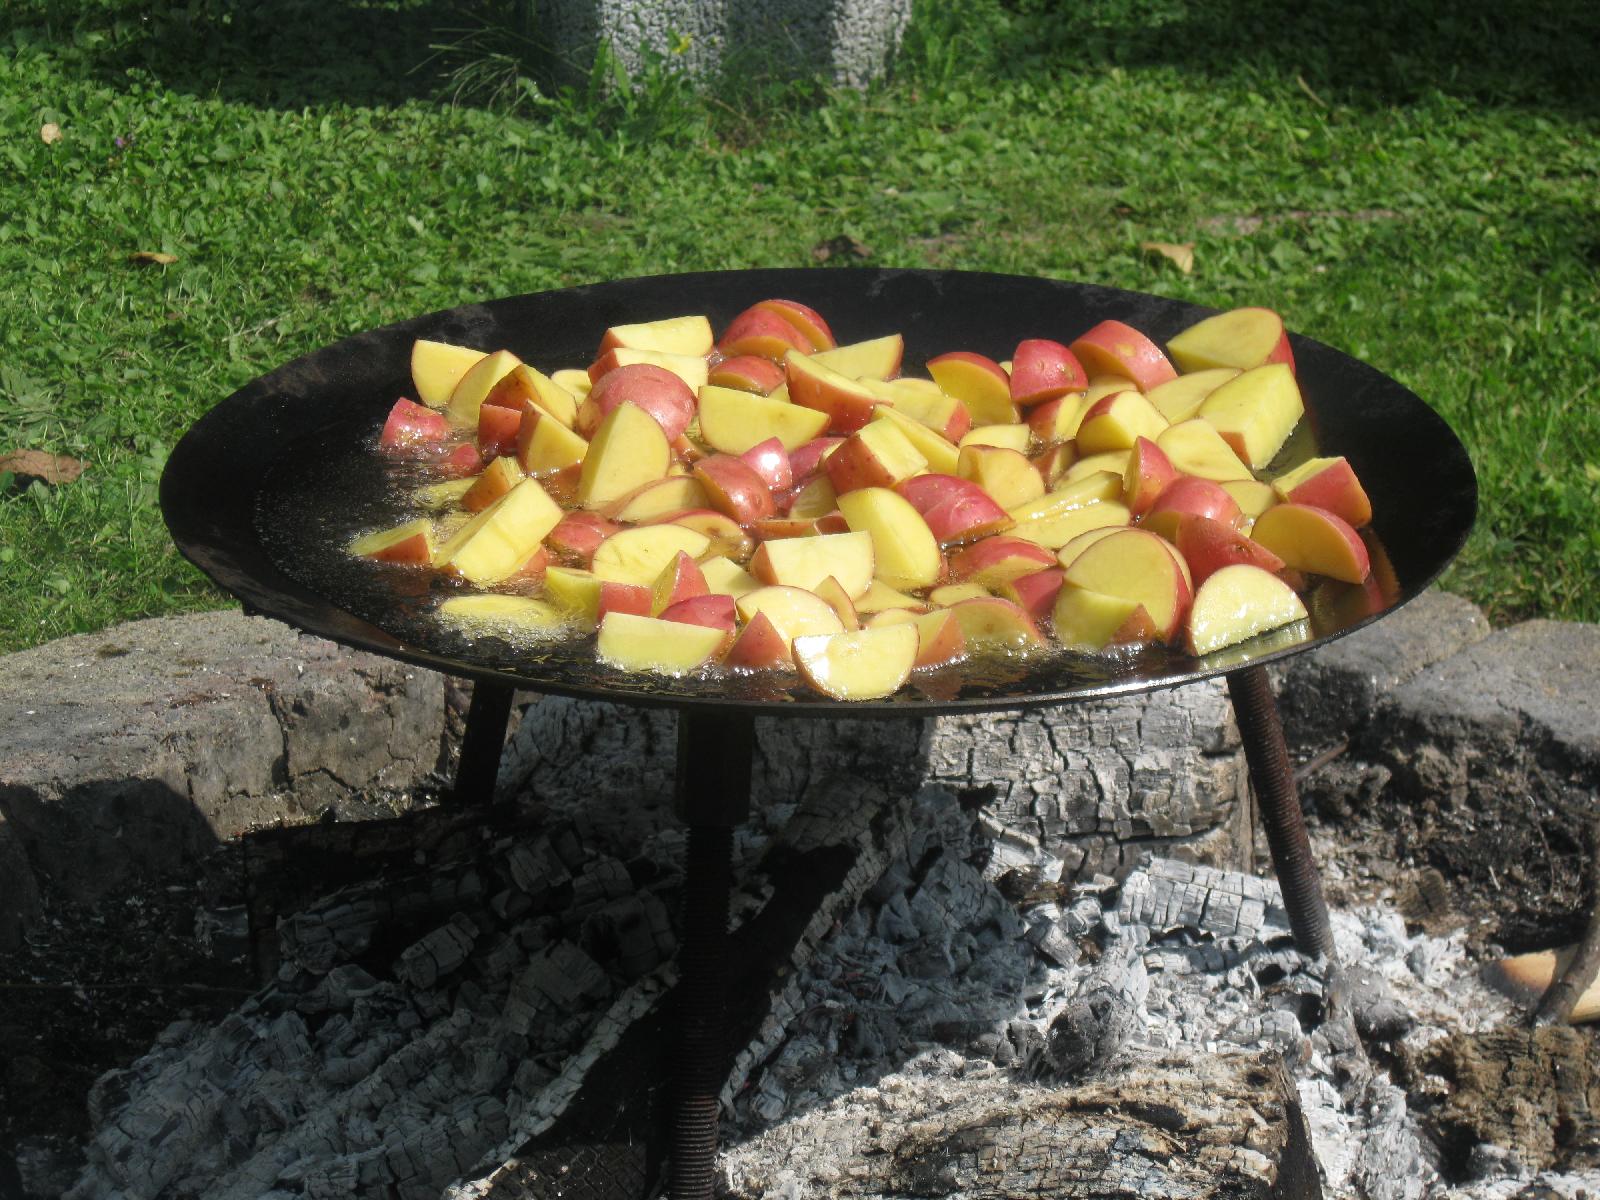 Potatoes frying over the firepit.